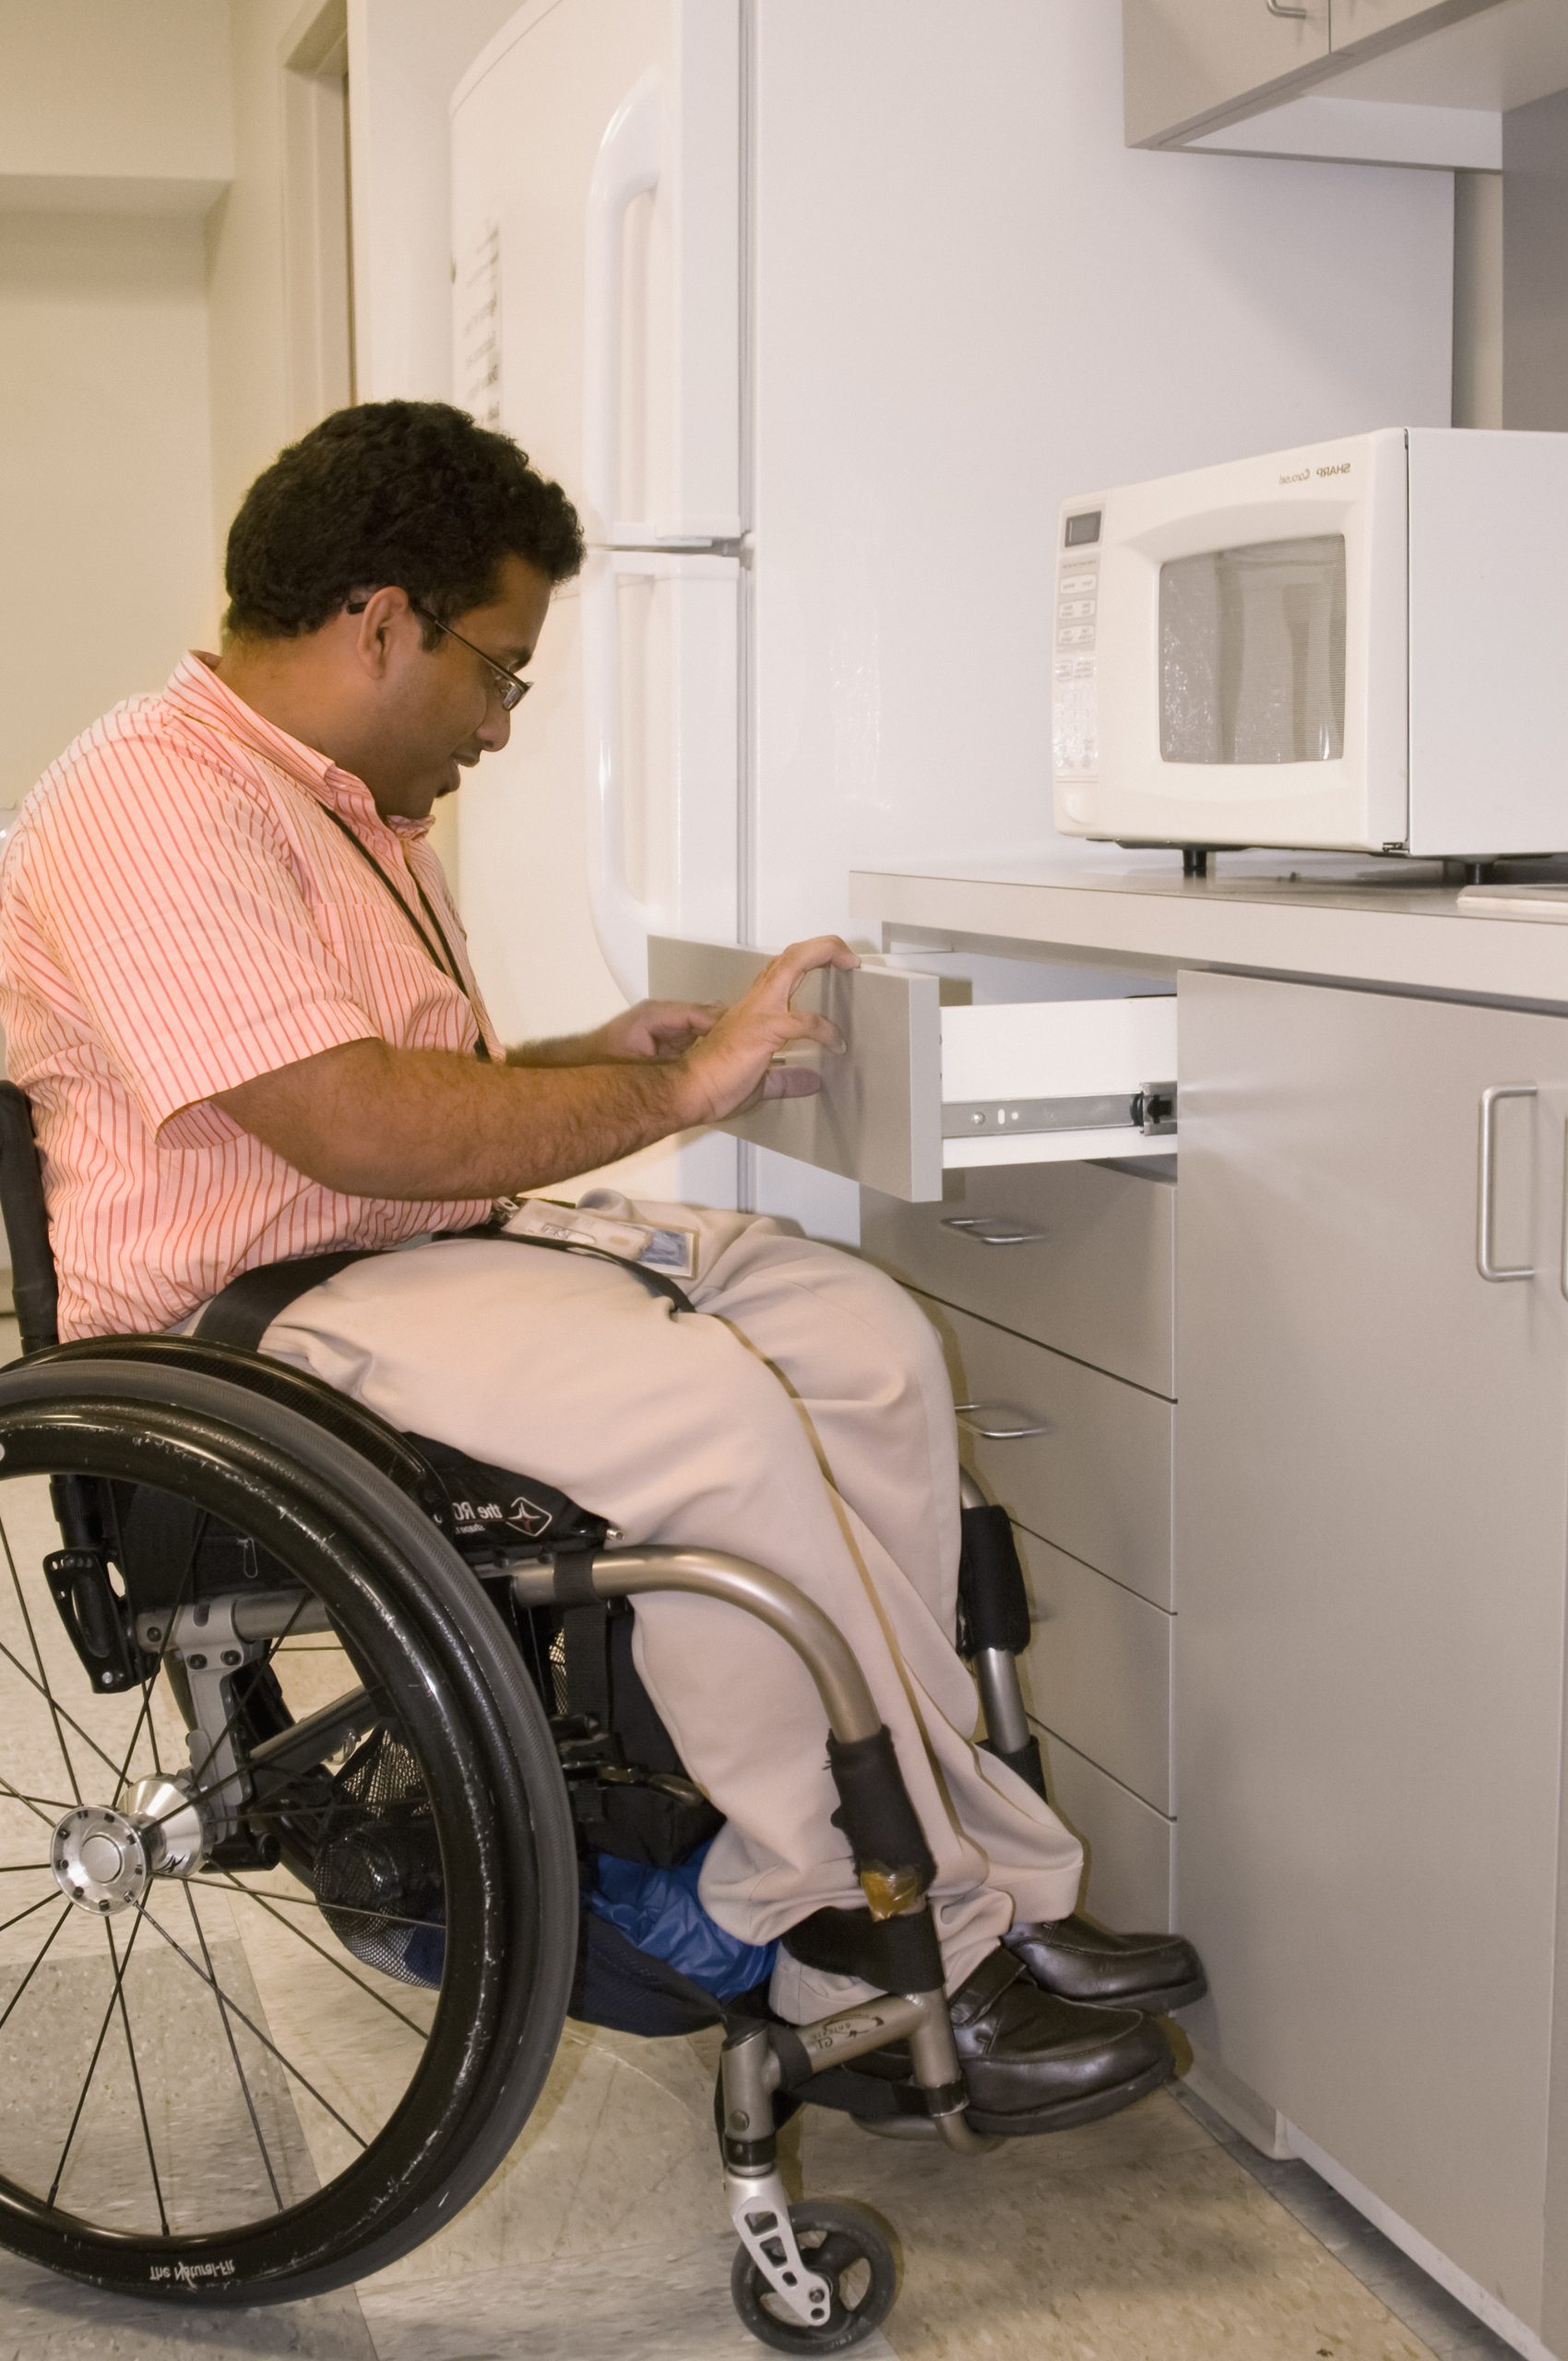 A man using a wheelchair opens a drawer in a kitchen